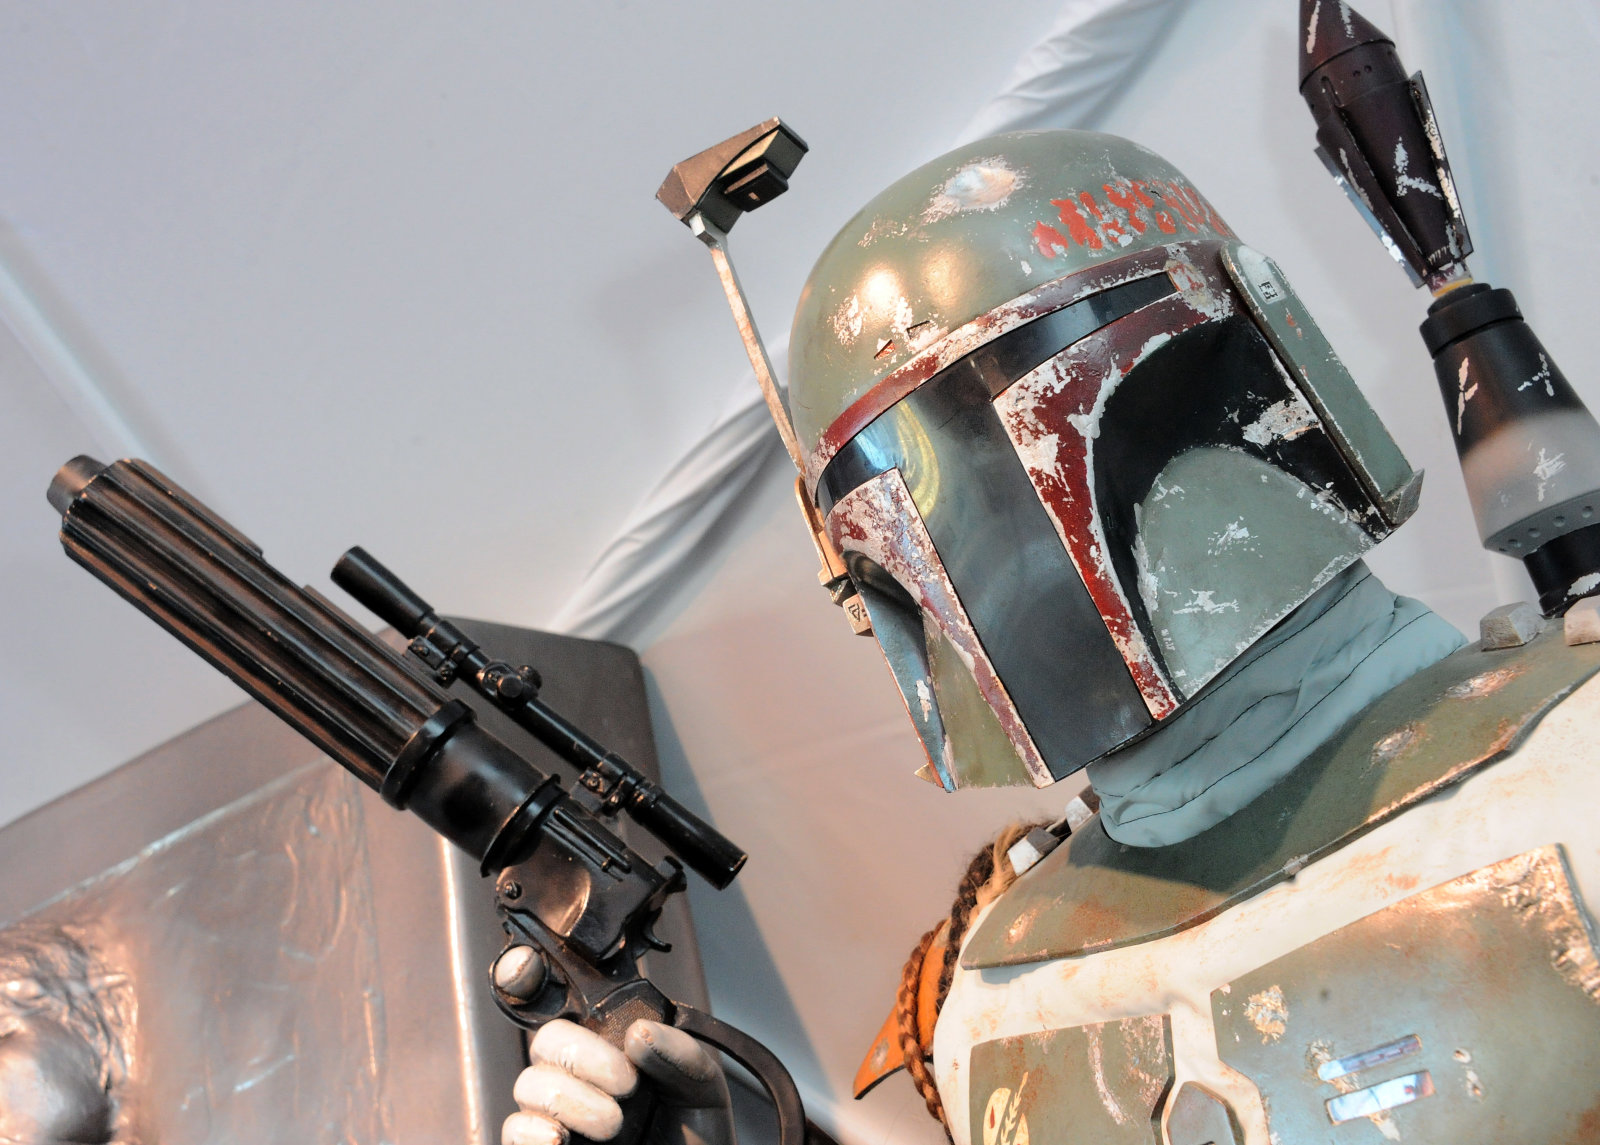 Boba Fett 'Star Wars' movie is in the works | DeviceDaily.com